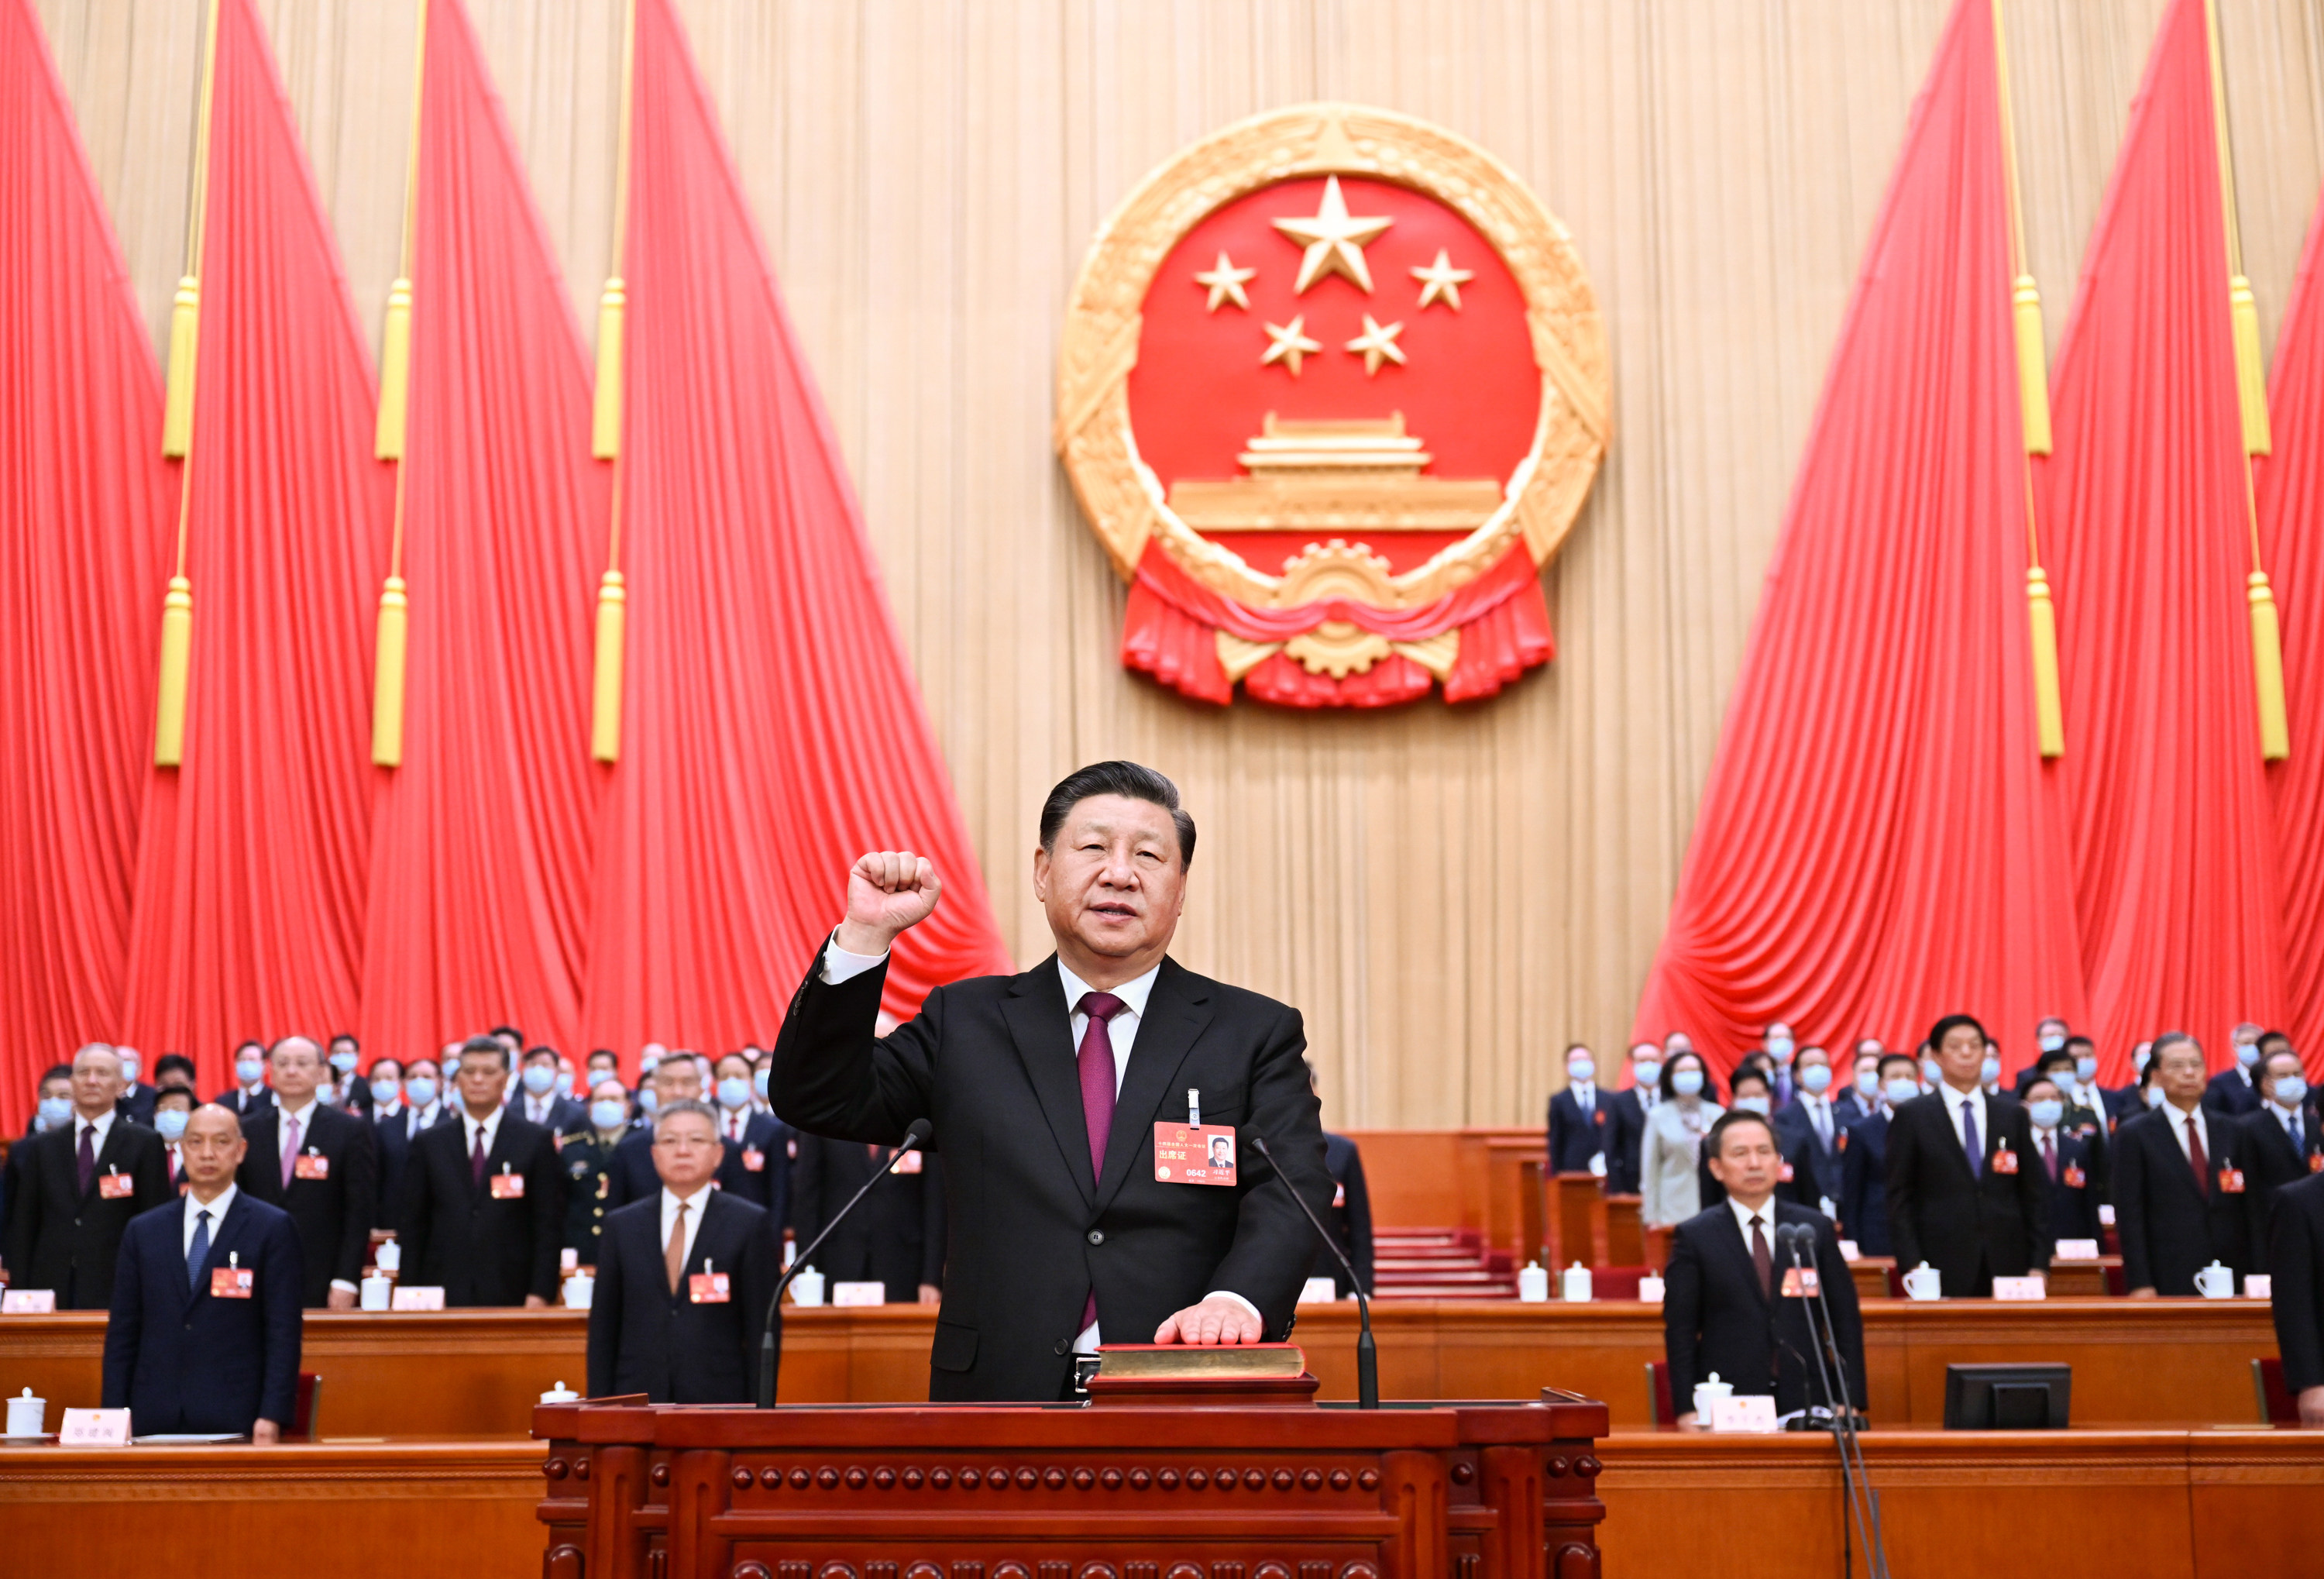 Xi Jinping, newly elected president of the People’s Republic of China and chairman of the Central Military Commission. Photo: Xinhua